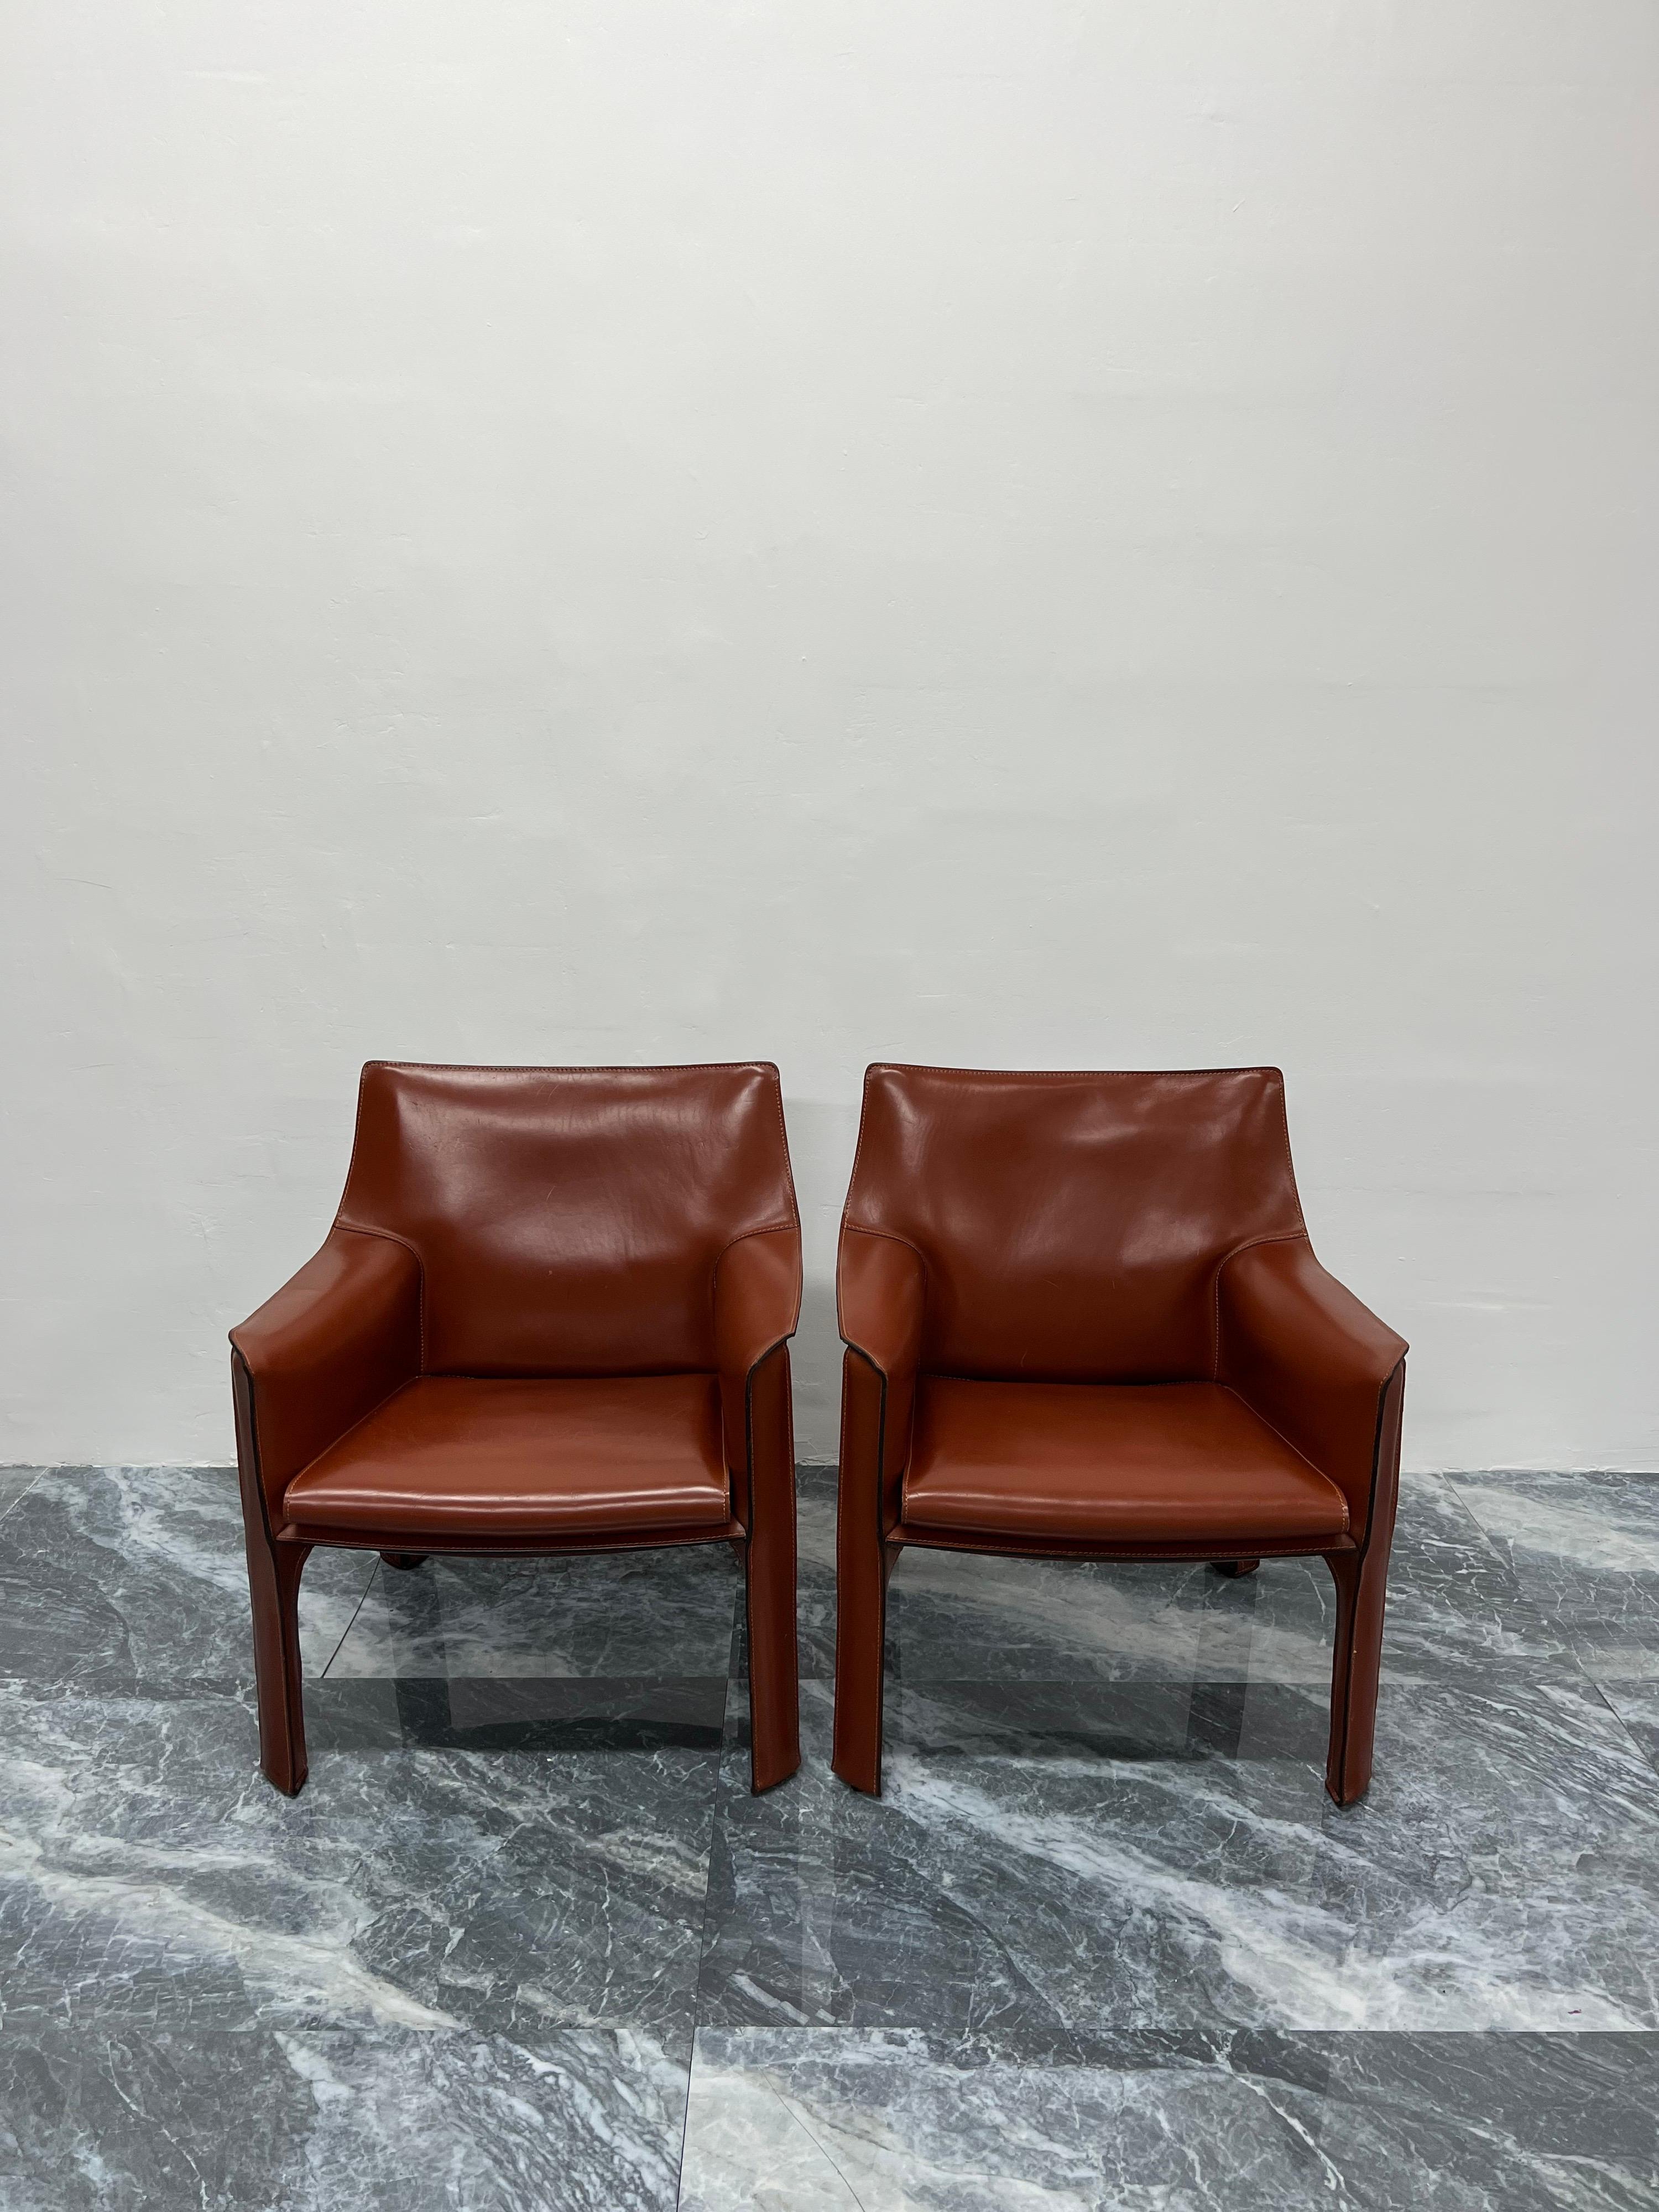 Pair of early production Cab leather lounge chairs with arms designed by Mario Bellini for Cassina. Italy, 1970s. The leather more closely resembles burnt umber. Labeled and stamped in leather.

“This was a new kind of chair, constructed totally out